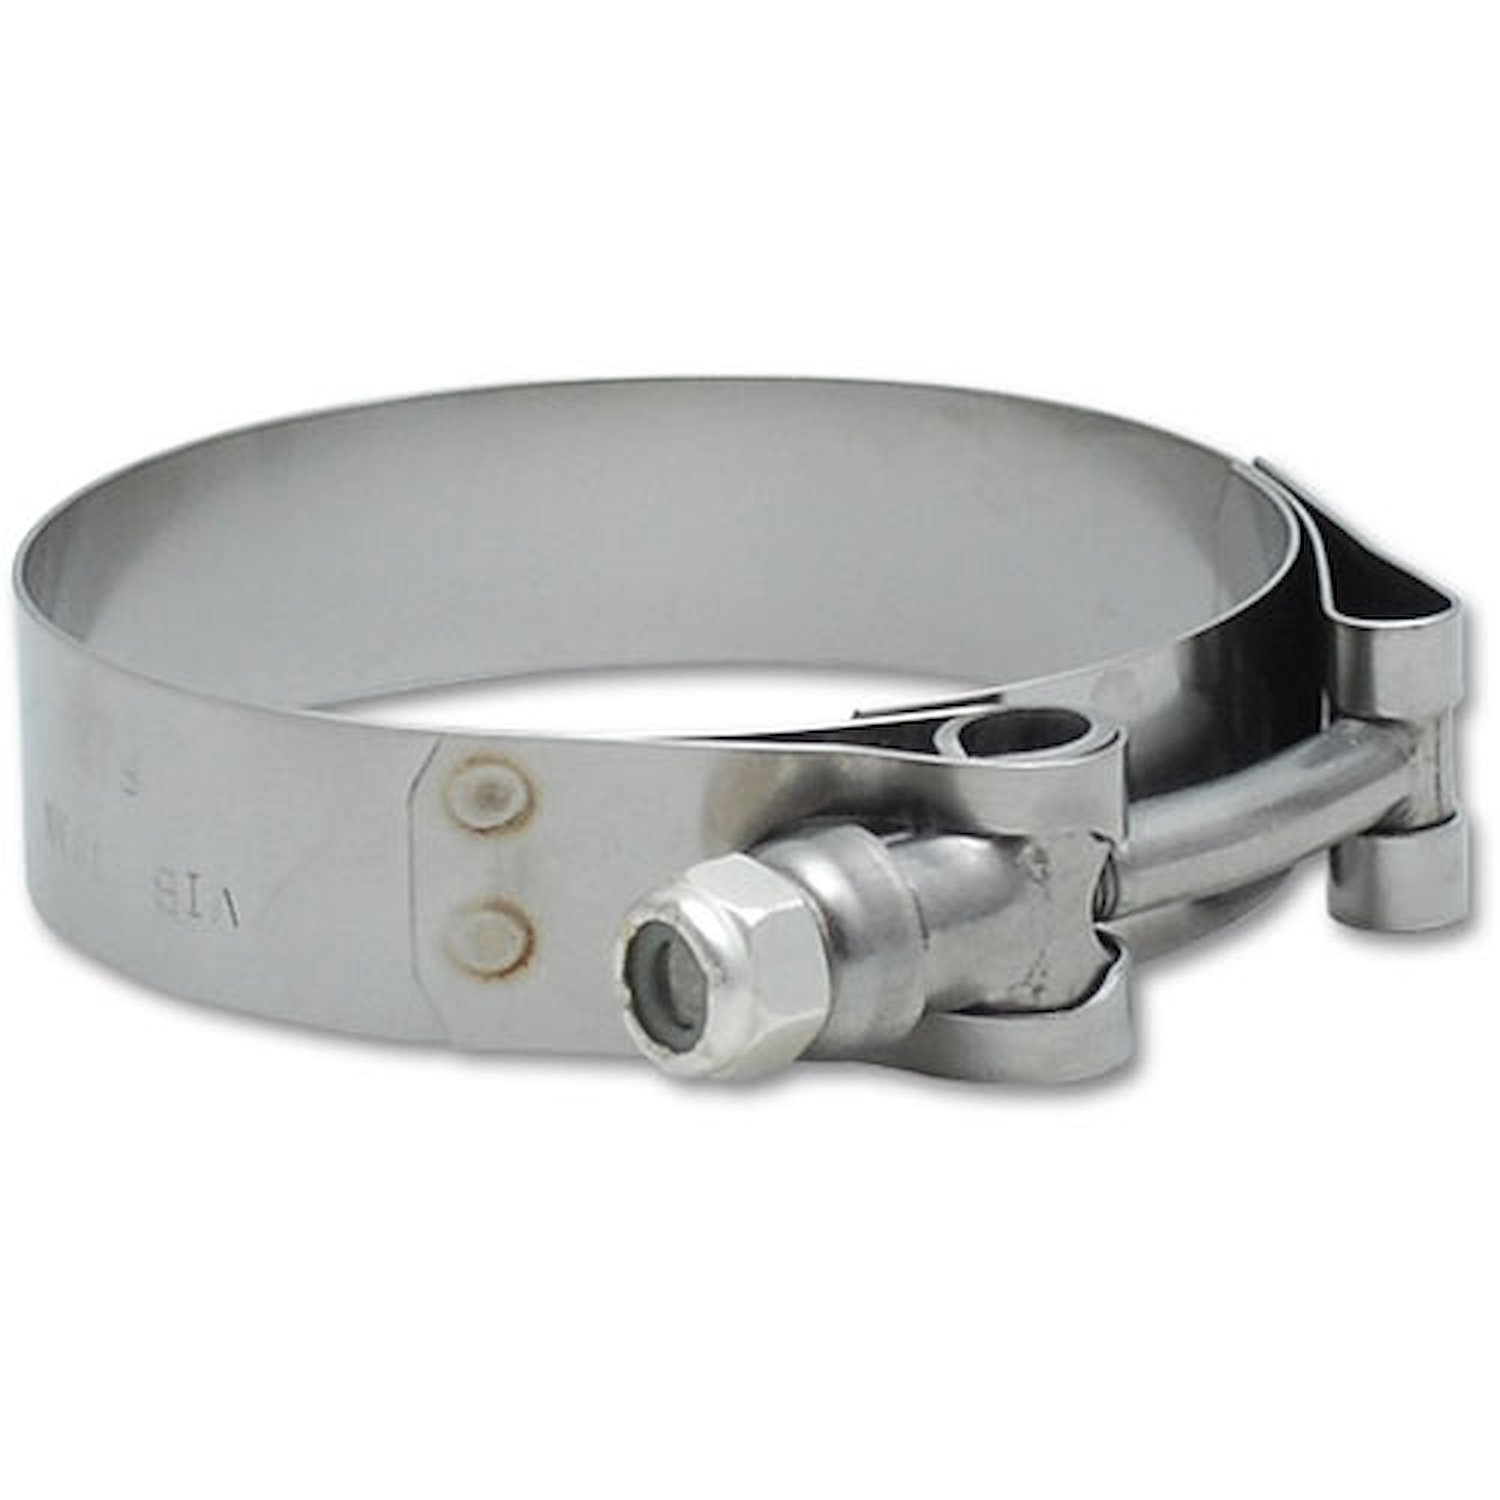 Stainless Steel T-Bolt Clamps Clamp Range 3.28" -3.60"